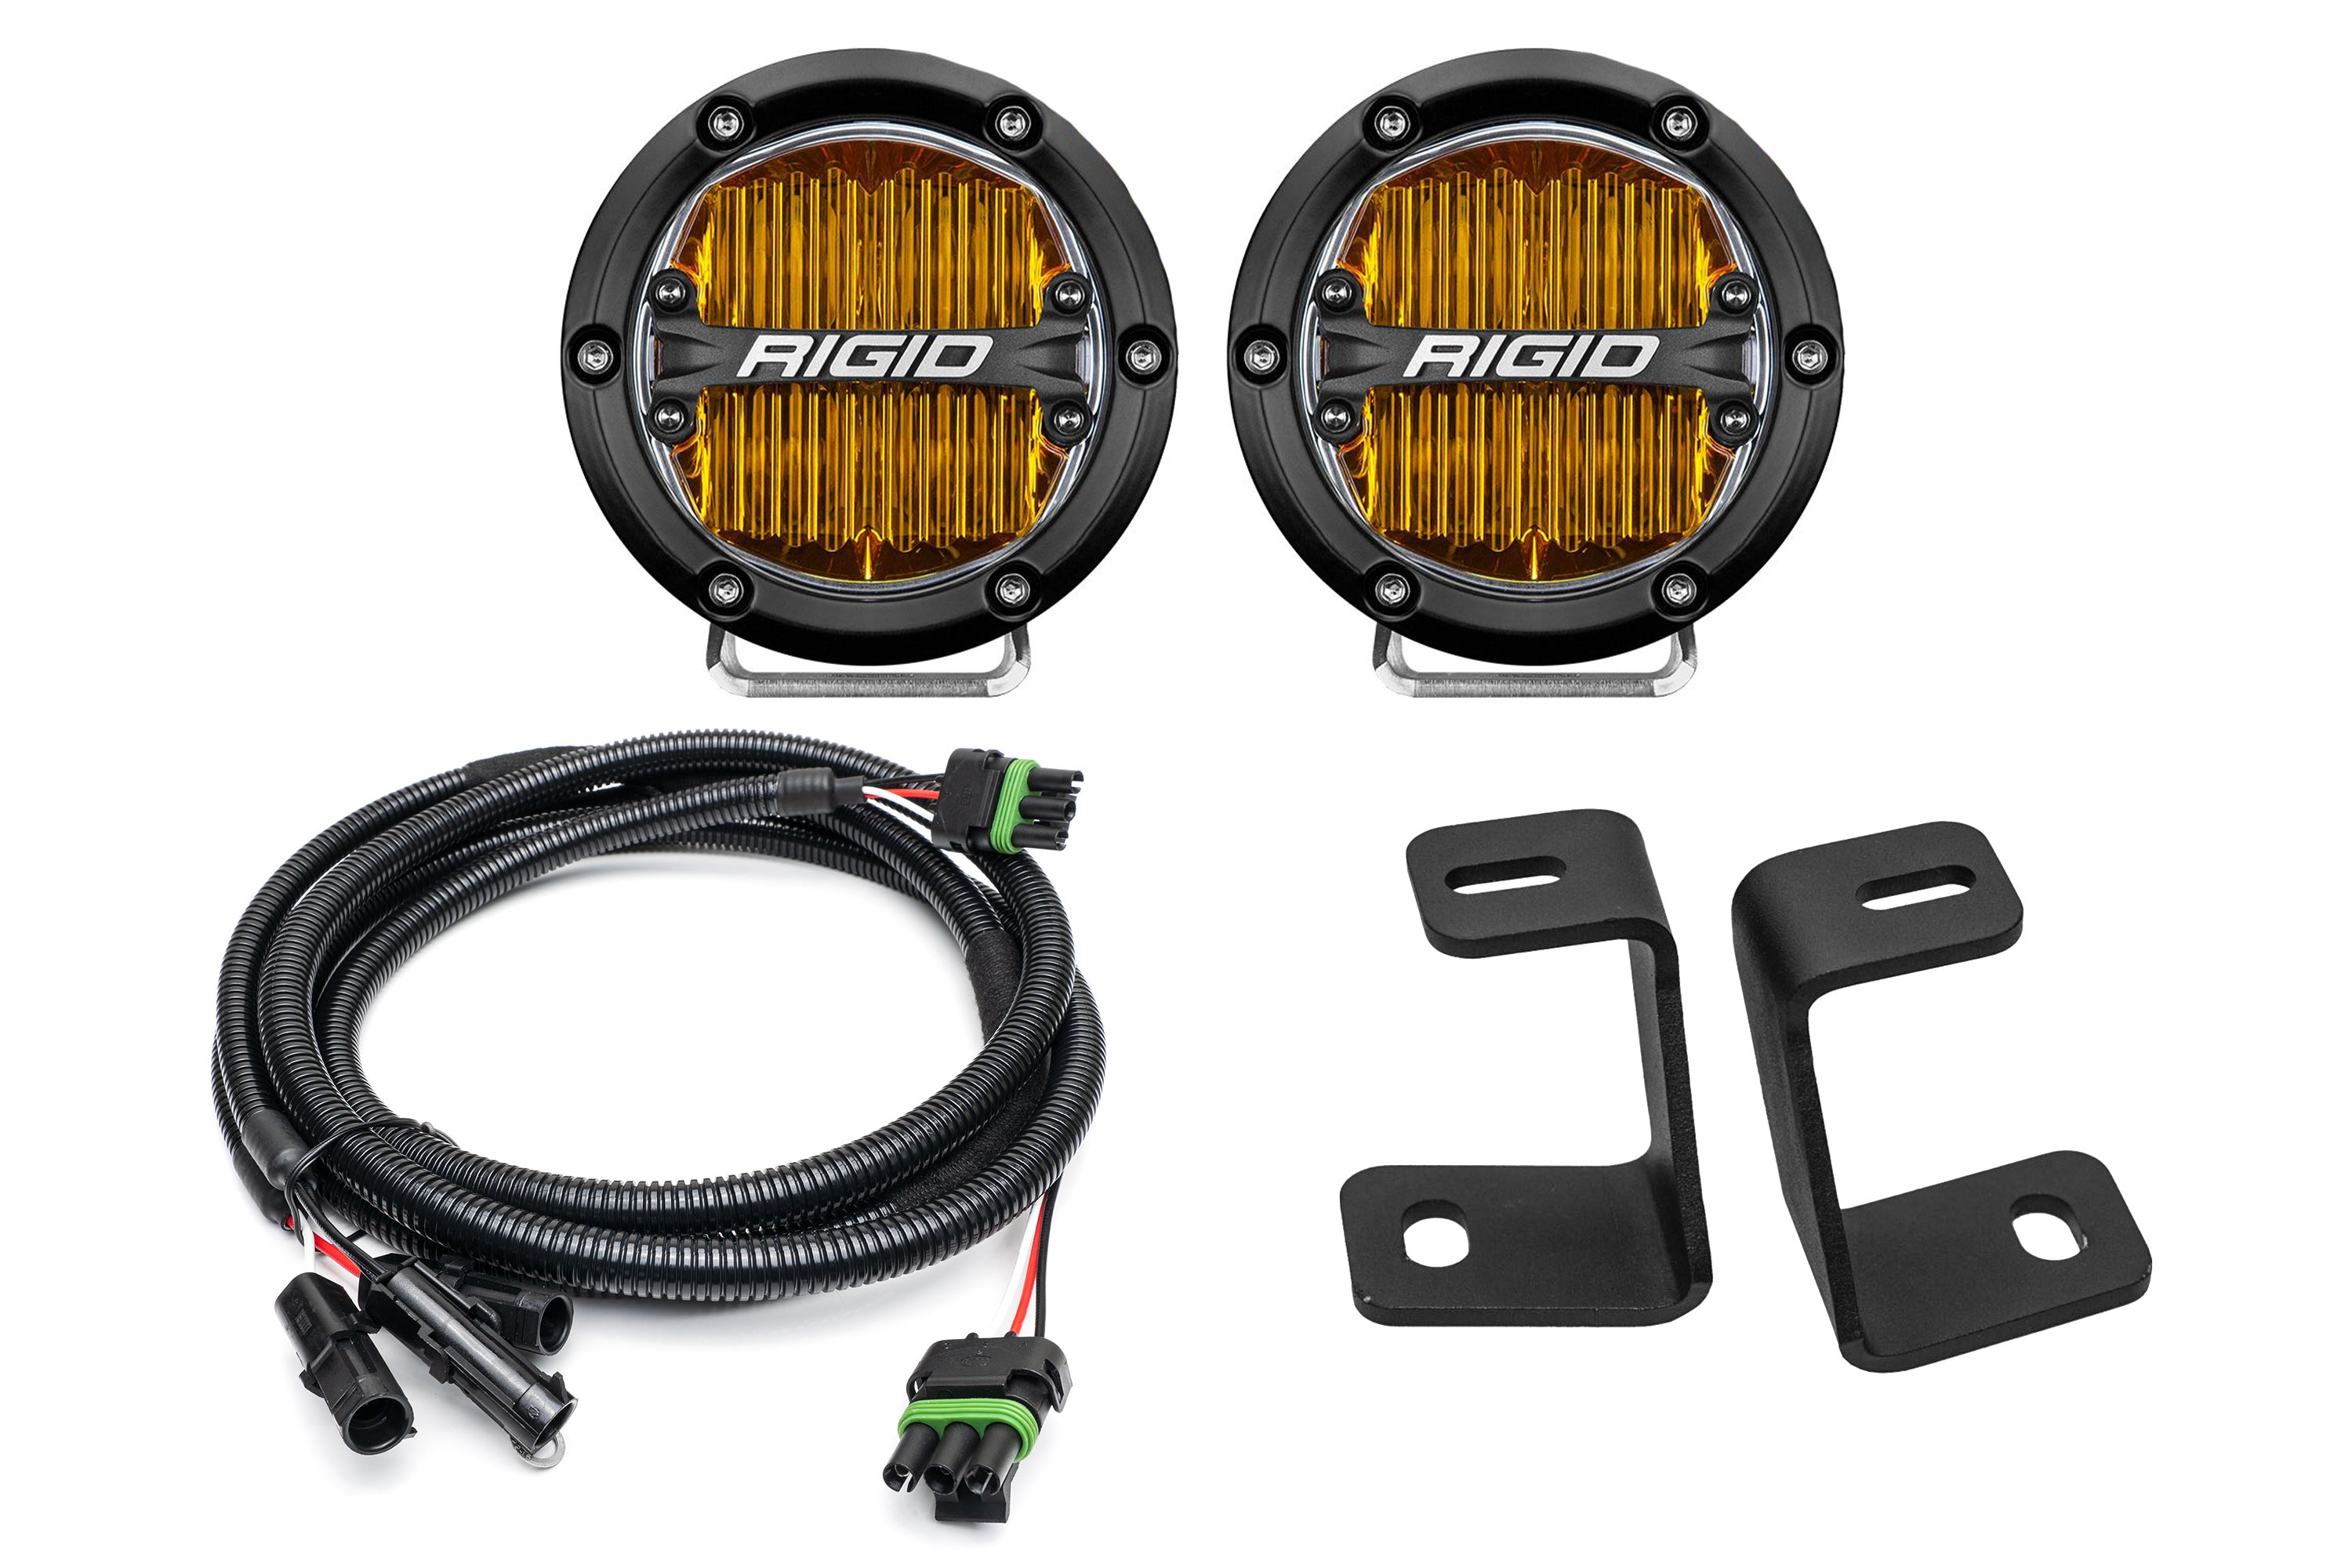 Specialty Performance Parts Rigid Standard A-Pillar (Ditch) Light Kit for Ford 2017-2020 Raptor/2015-2020 F-150